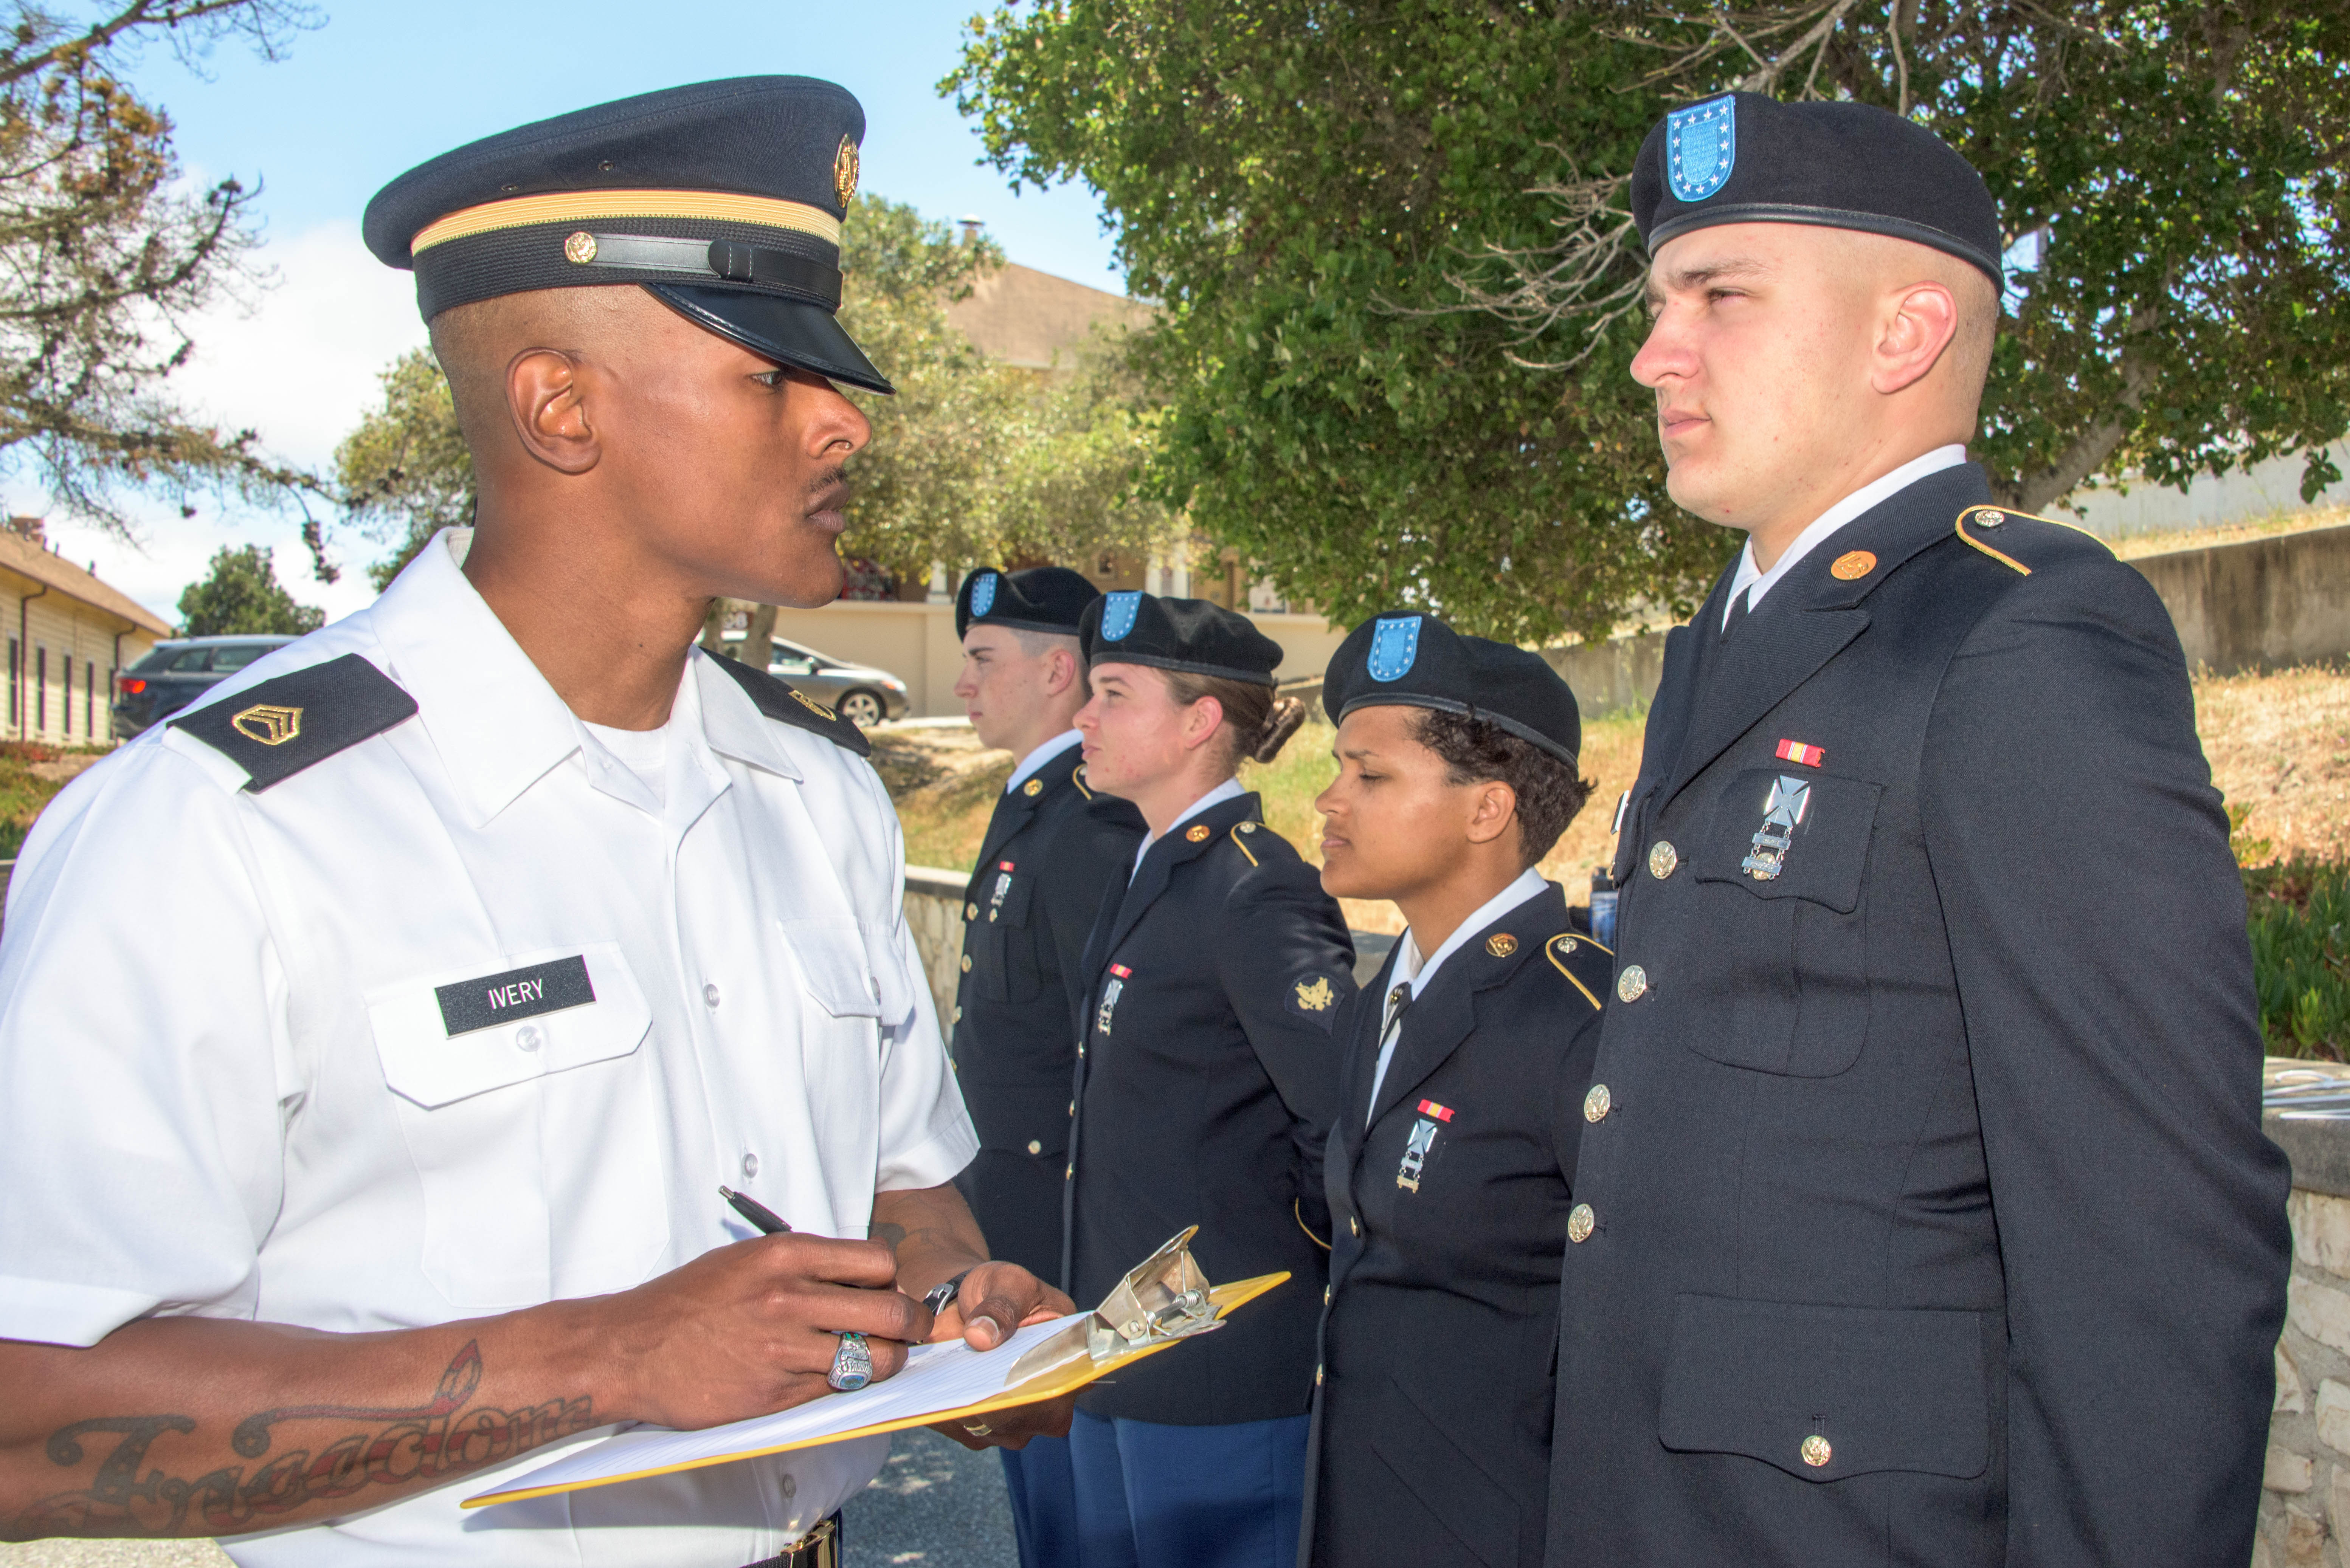 Lifetime of competition readies NCO for award of a lifetime